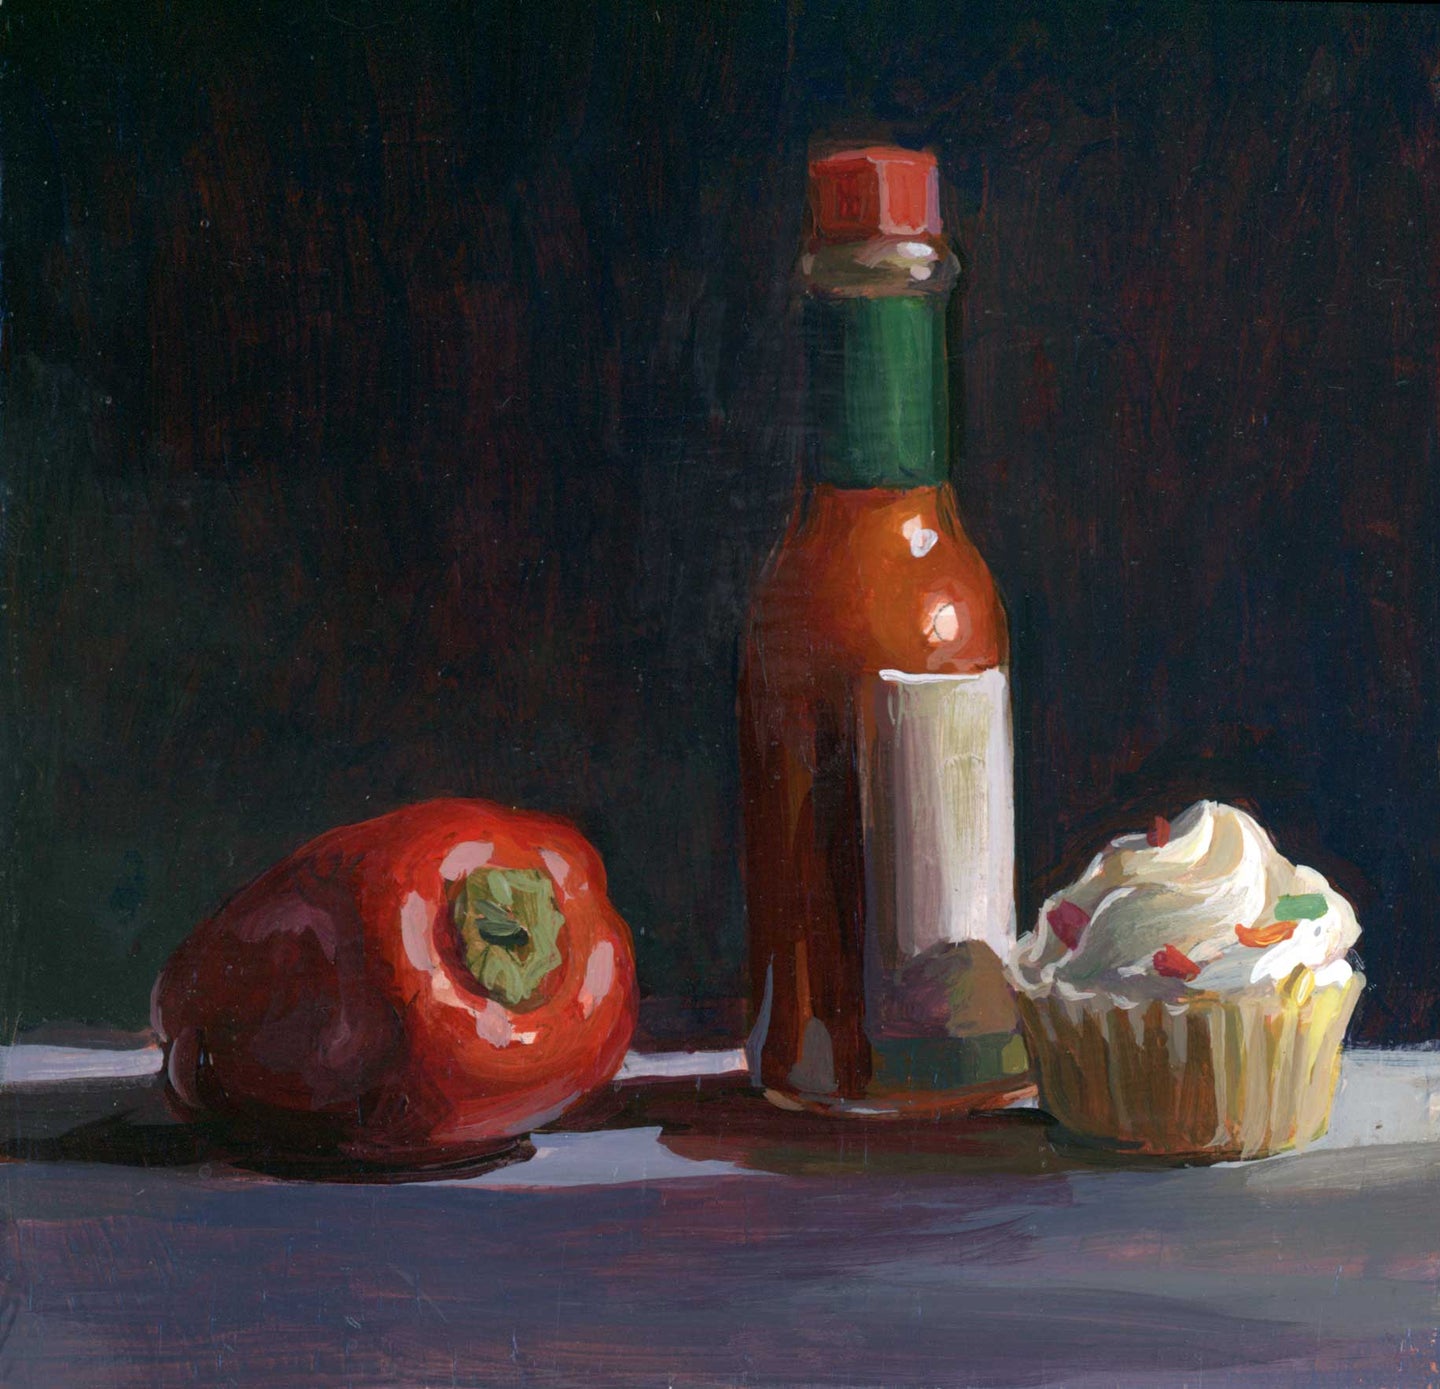 83. Red-Pepper, Hot Sauce and Cupcake